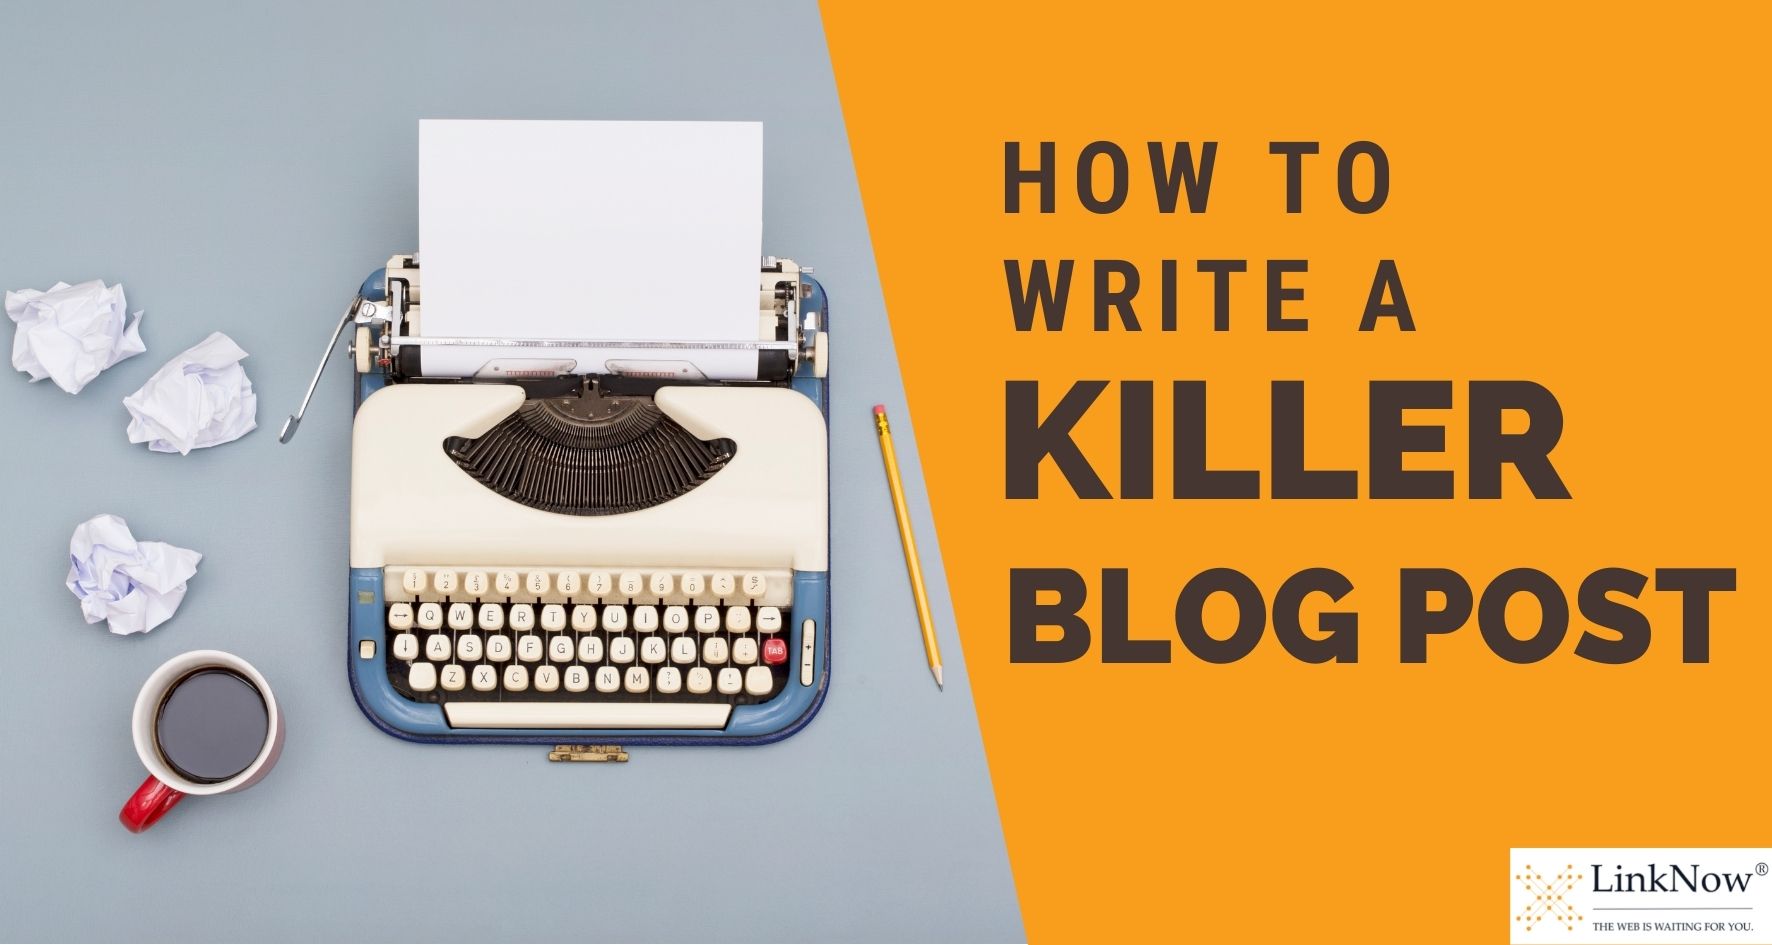 On the left, a typewriter, pencil, cup of coffee, and three scrunched-up sheets of paper. On the right, text says: How to write a killer blog post.